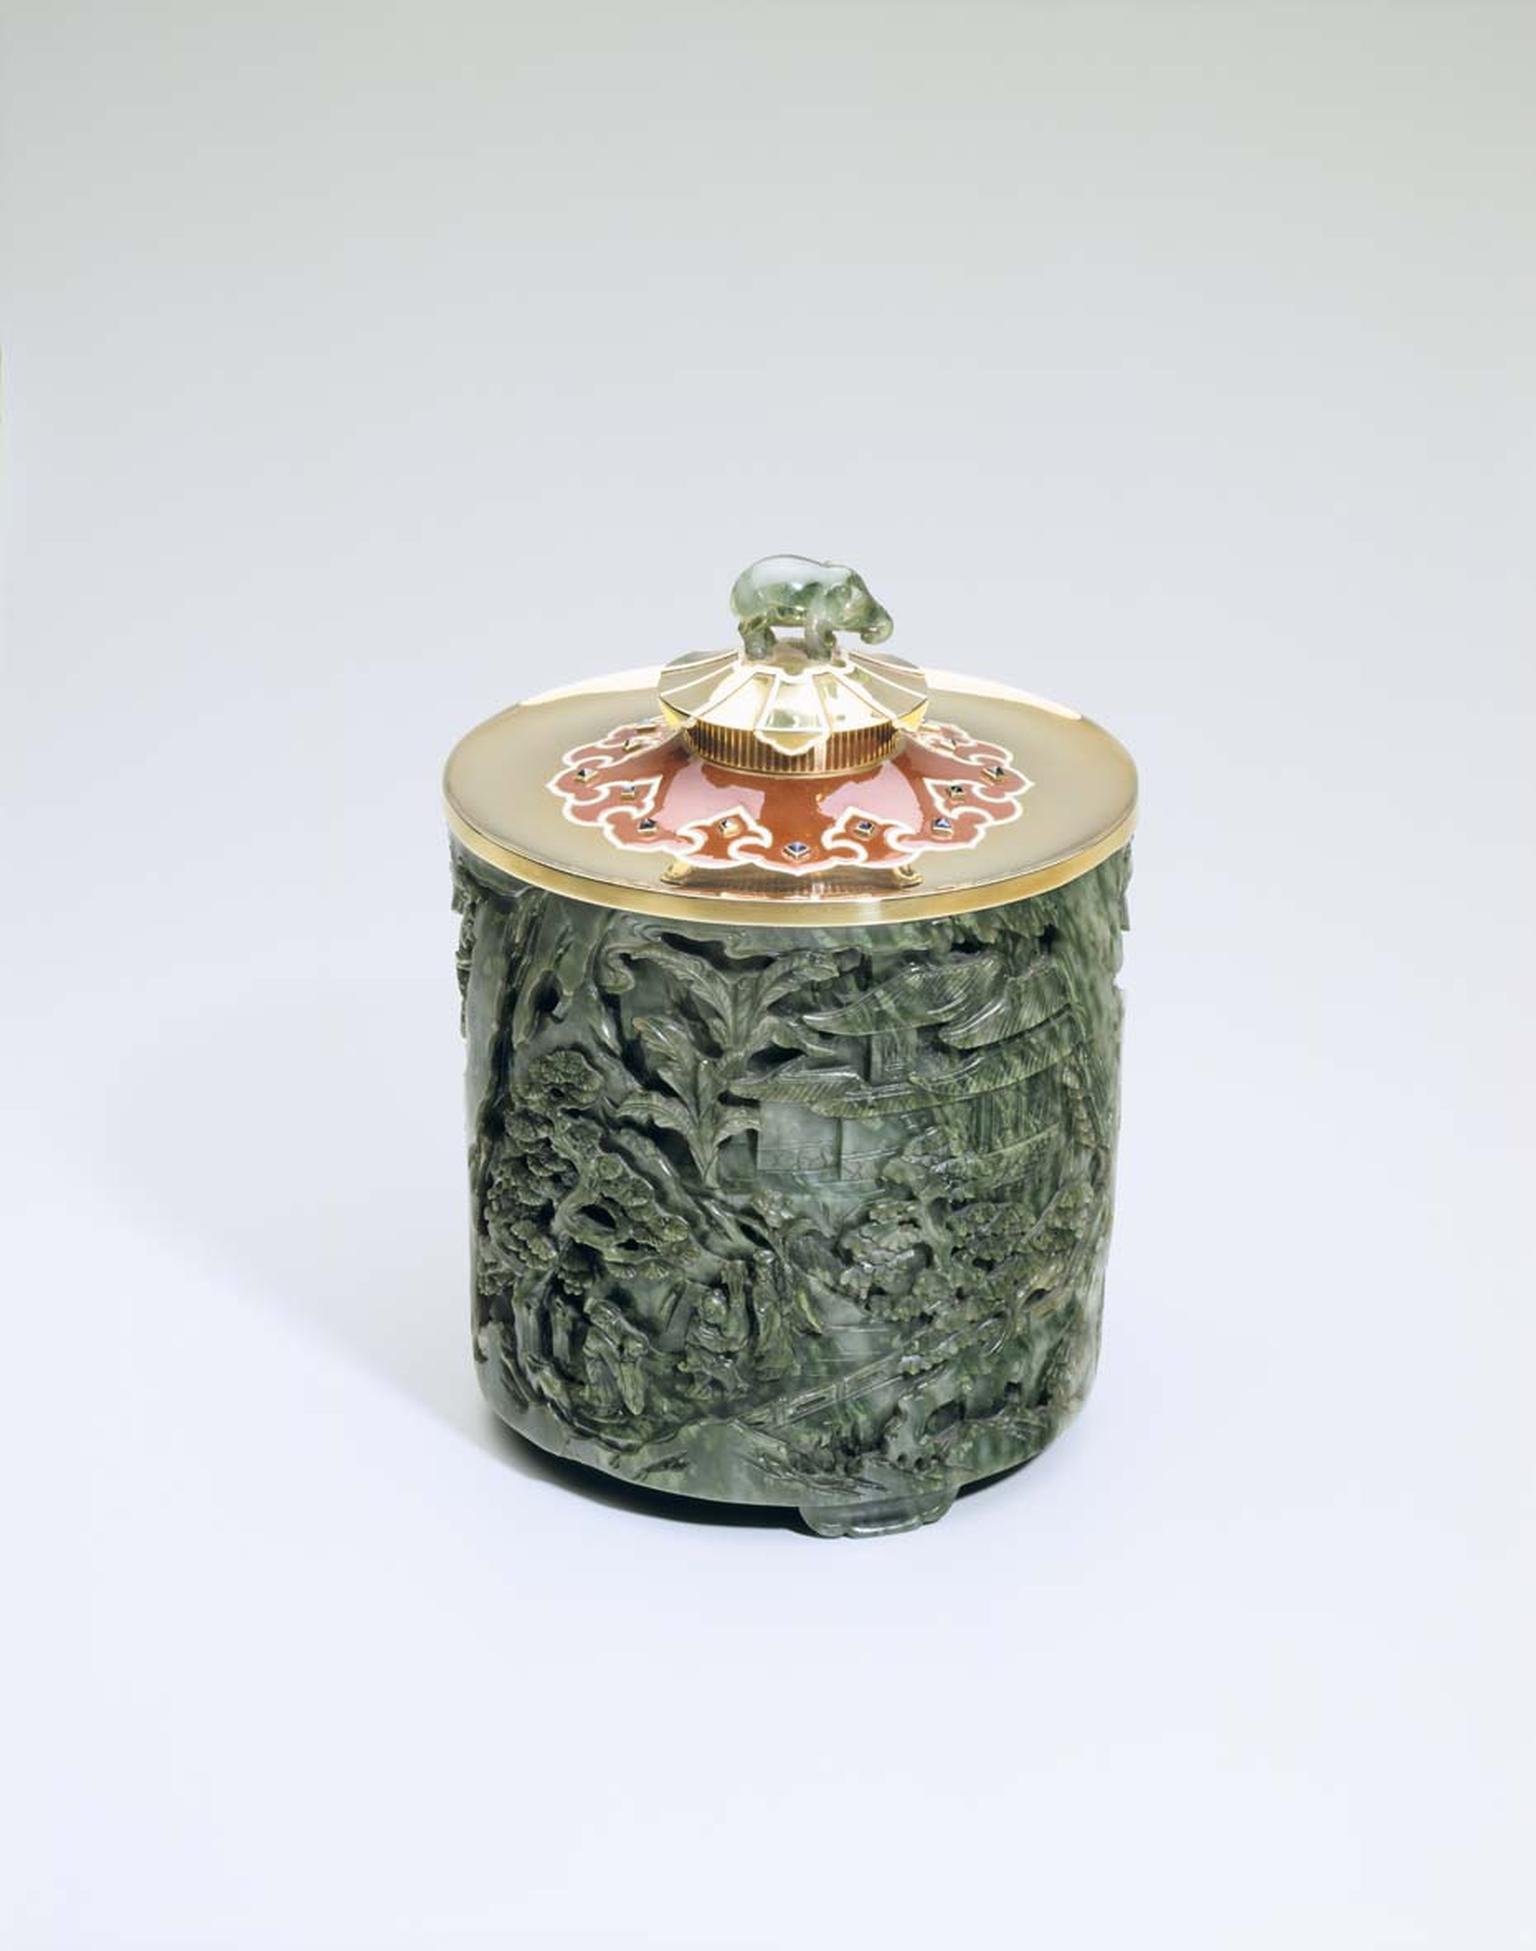 Cartier gold tobacco jar with jade, enamel and sapphires dating from 1930. Image: Courtesy Hillwood Estate, Museum and Gardens